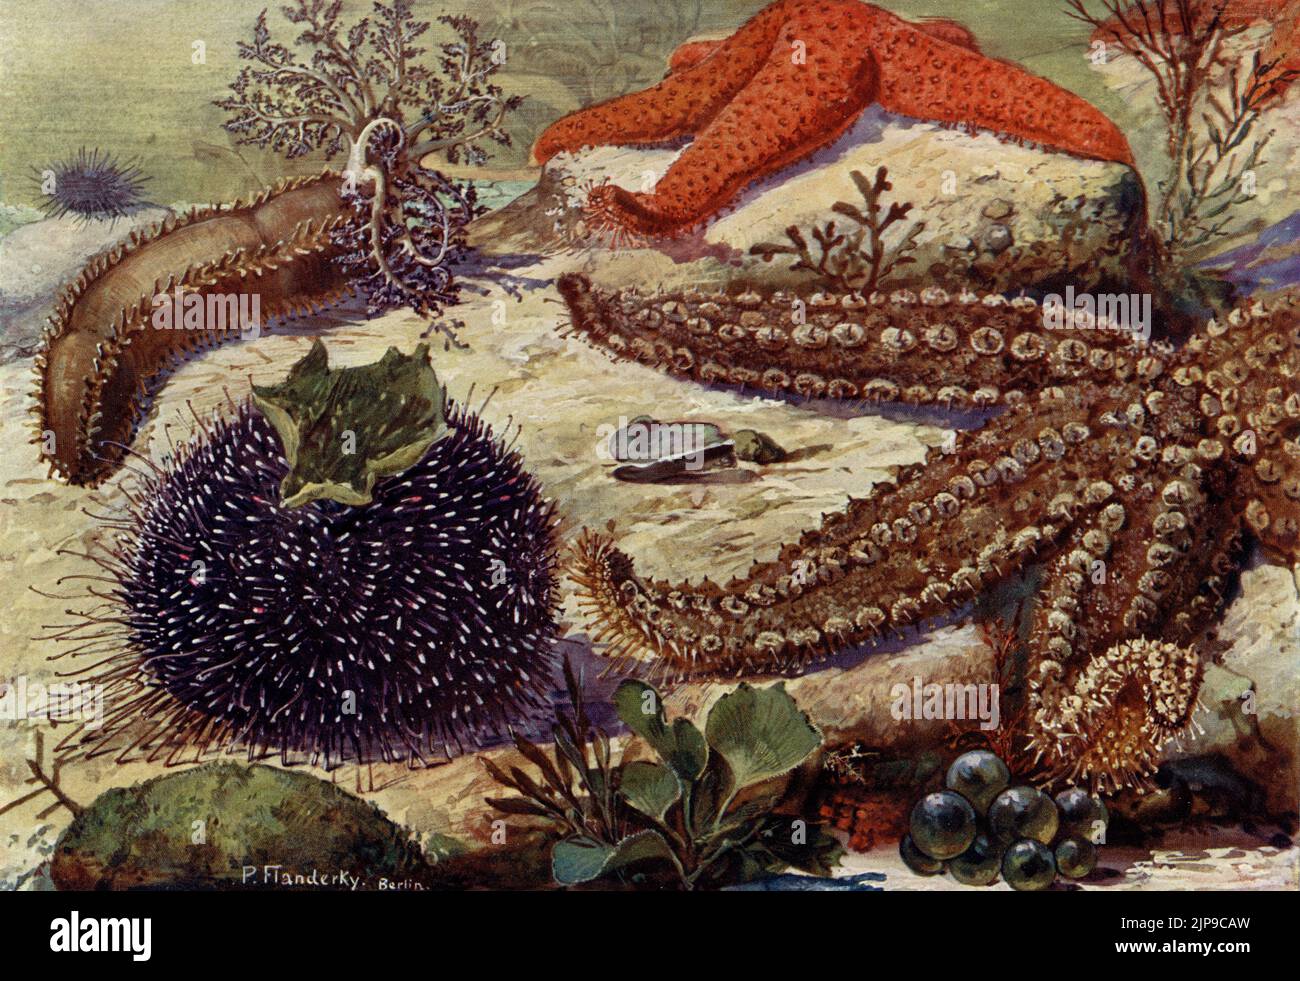 Seabed marine invertebrates:  Sea Cucumber (Cucumaria planci), Violet or Purple Sea Urchin (Sphaerechinus granularis), Red Starfish (Echinaster sepositus) and Spiny Starfish (Marthasterias glacialis). Depicted in a rare early 1900s German chromolithograph print of a painting by wildlife artist, Paul Flanderky (1872-1937).  It helped to illustrate the (1911-18) 4th edition of Brehms Tieleben (Brehm’s Animal Life). Stock Photo